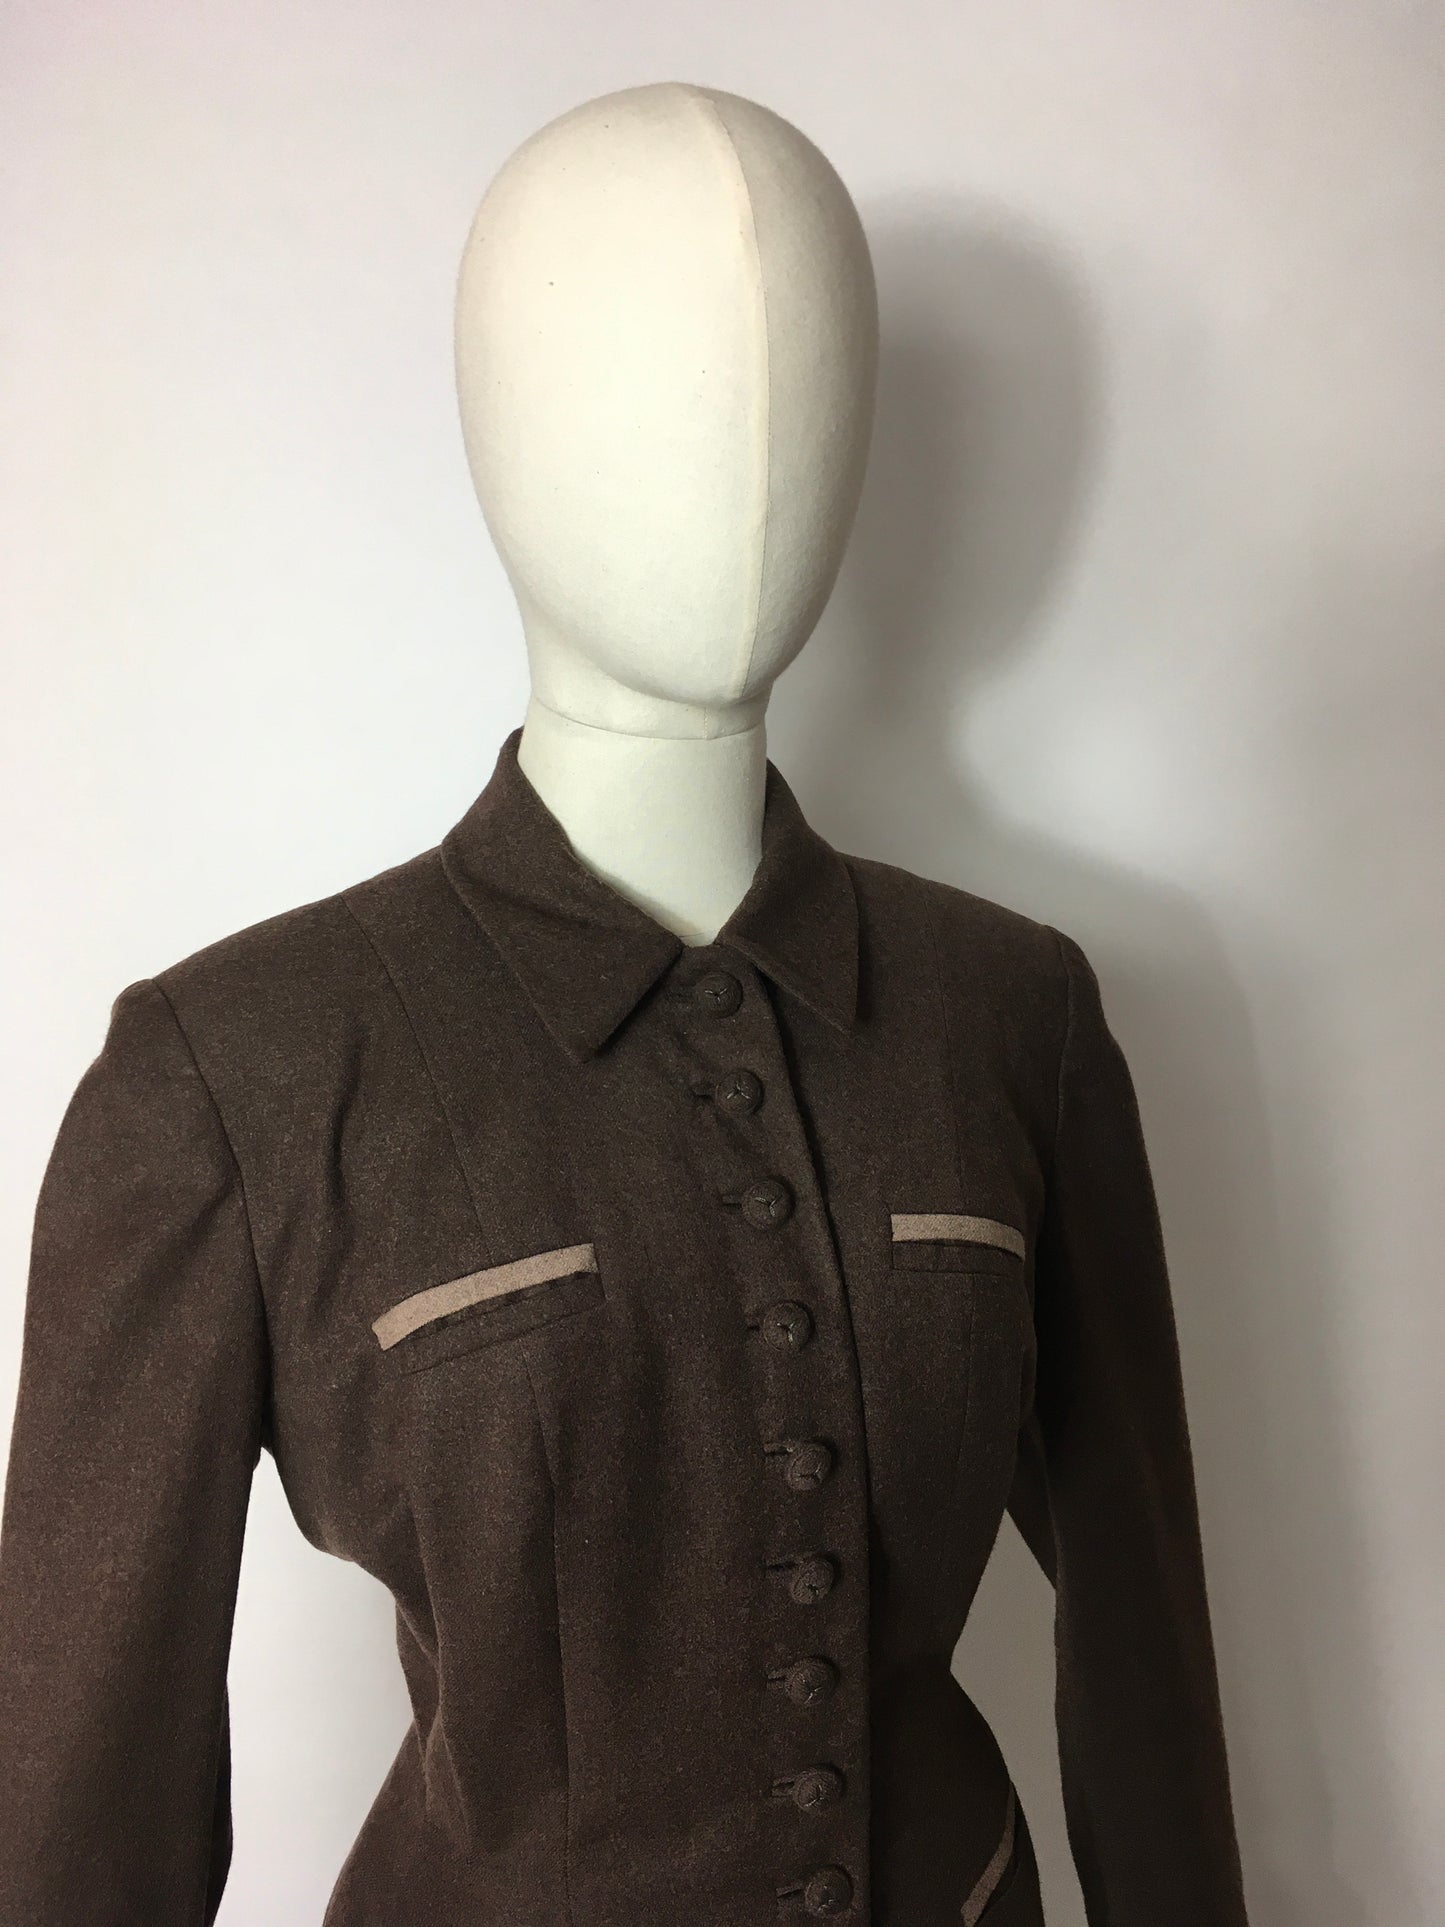 Original 1940’s 2pc Suit in A Lovely Brown Wool, Stunning Detailing and Seamwork